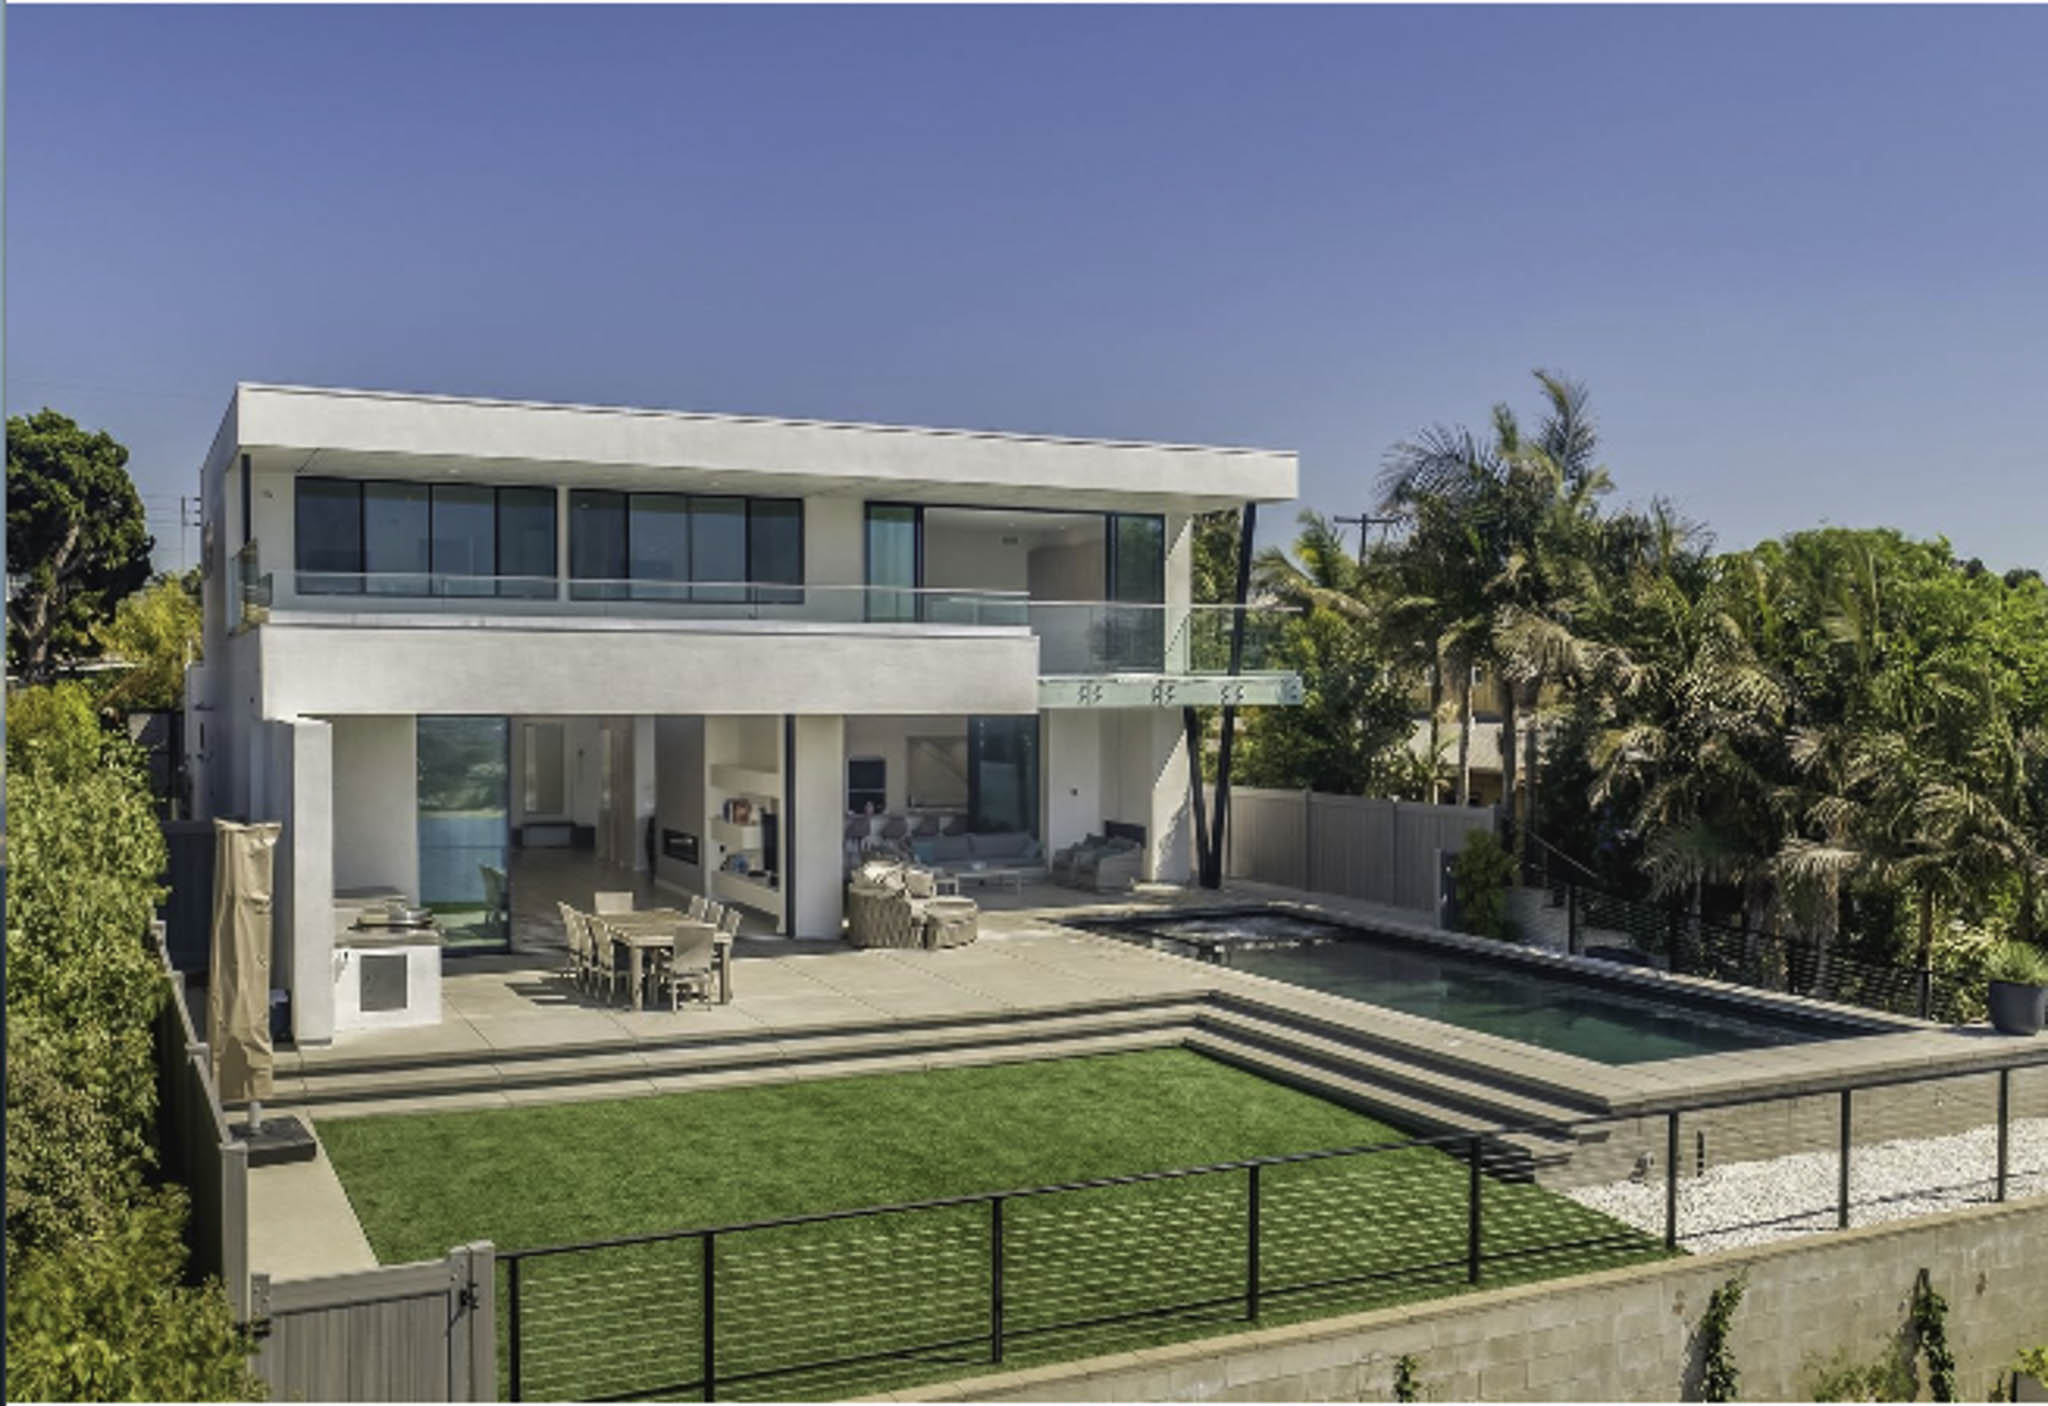 The Best Residential Architects in Santee, California - Home Builder Digest